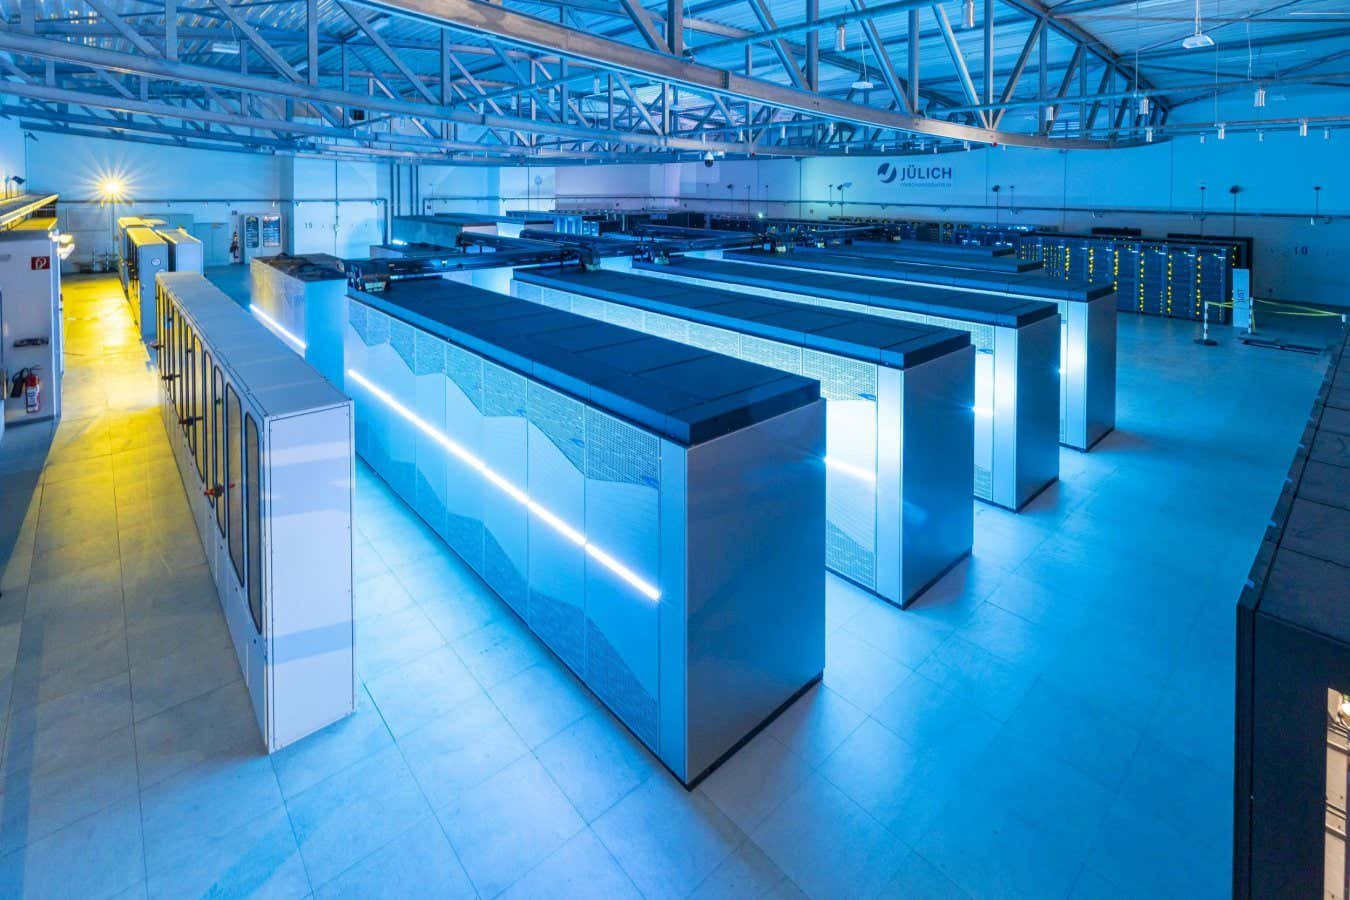 Europe plans to construct the sector’s quickest supercomputer in 2024